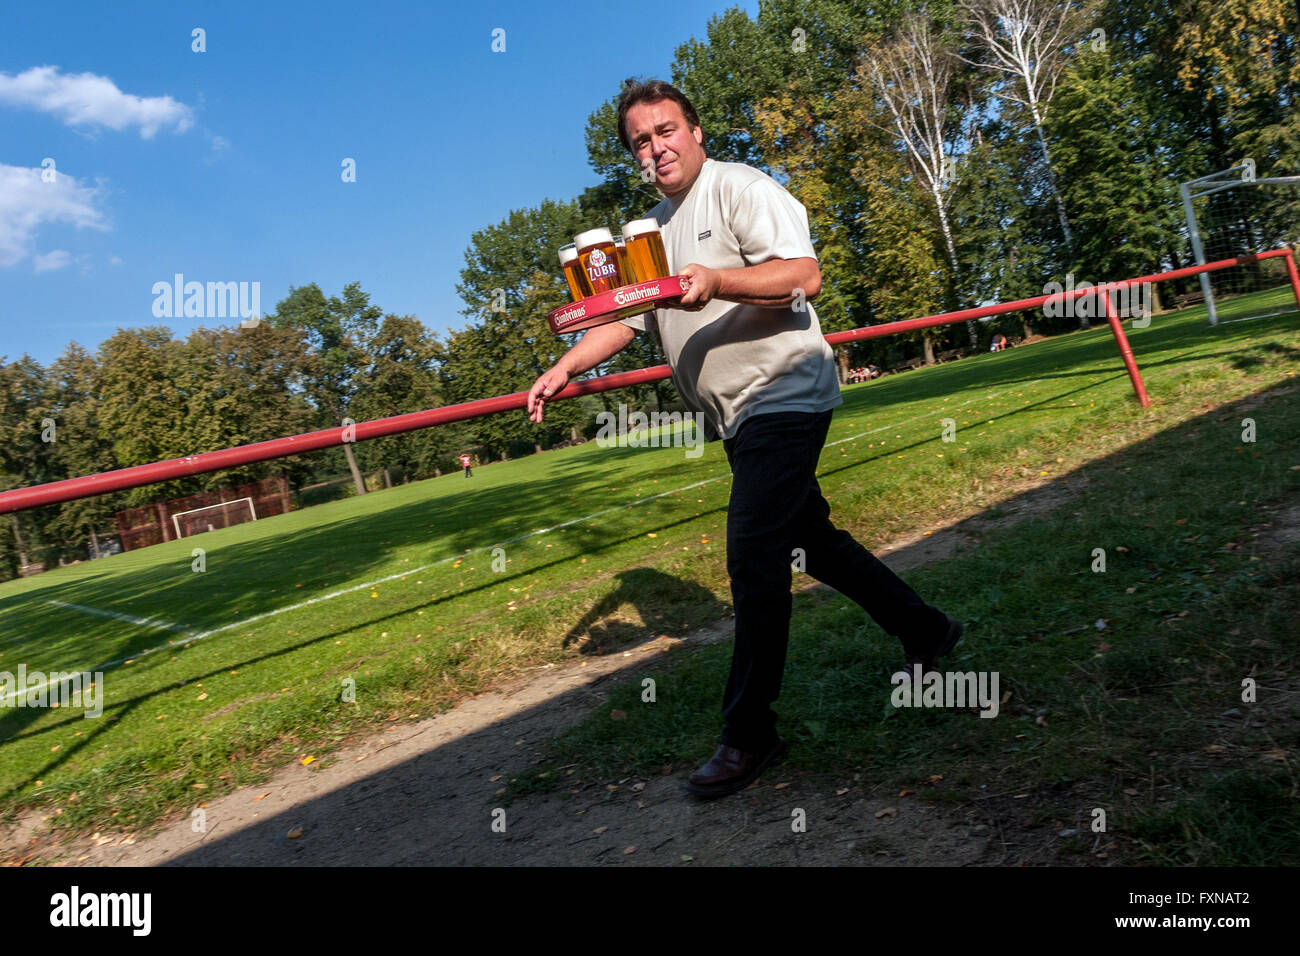 Waiter serving beer, a man carries a tray of beer brand Zubr. Moravian village, Czech Republic football in a small rural village, lifestyle Stock Photo